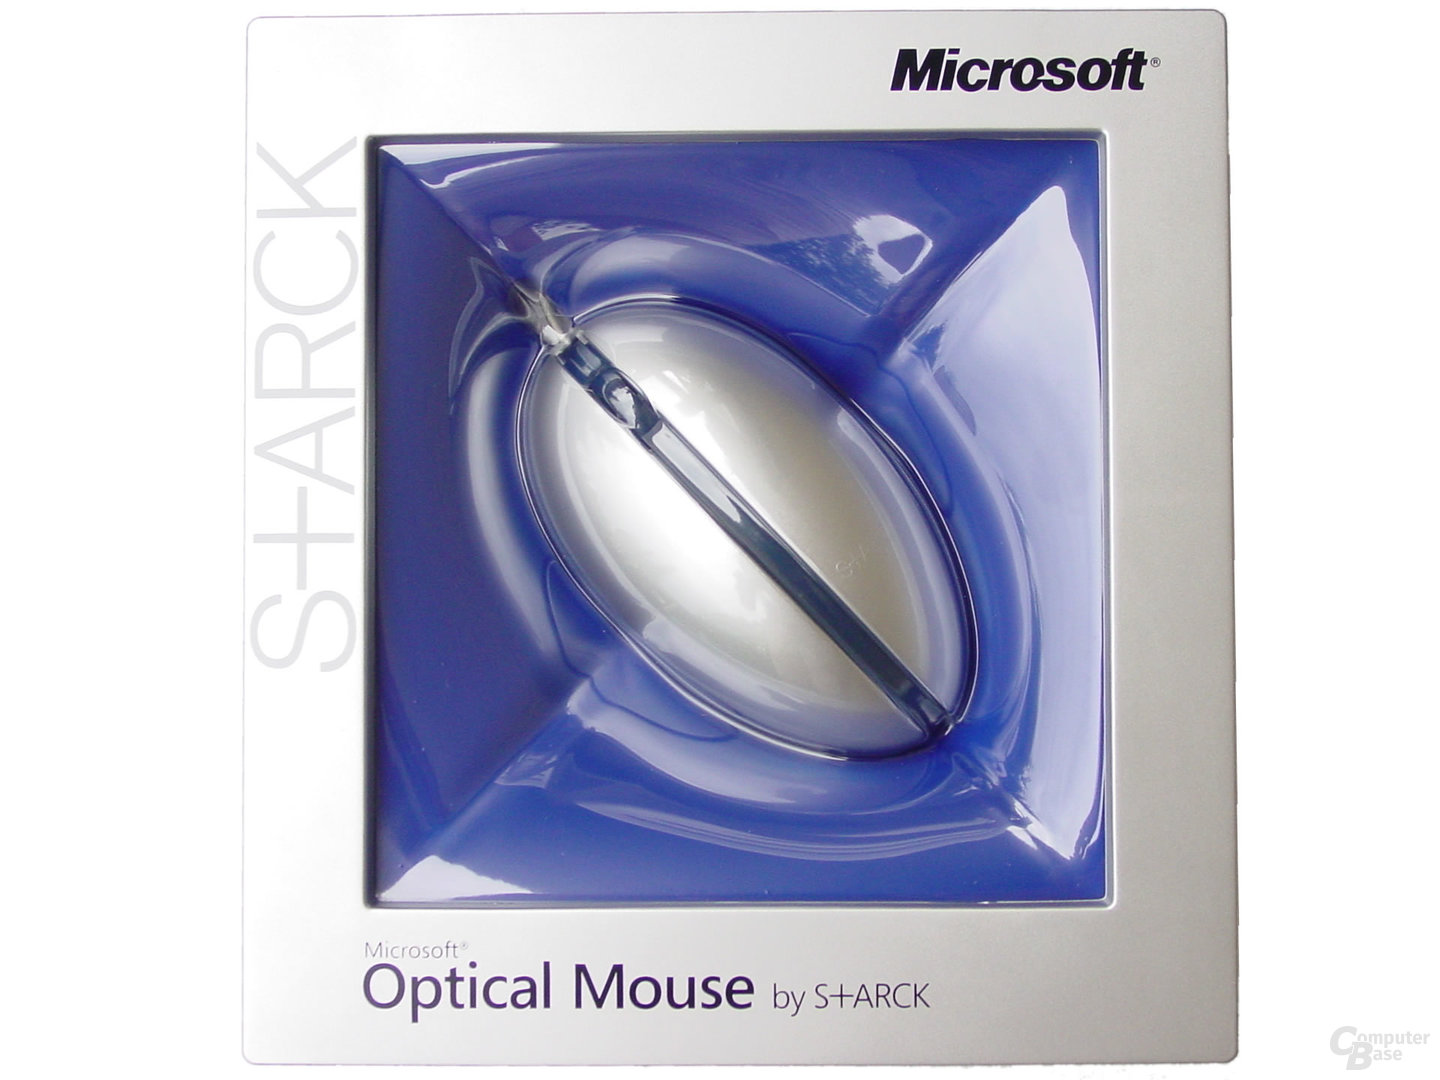 Verpackung Optical Mouse by Starck - Vorderseite